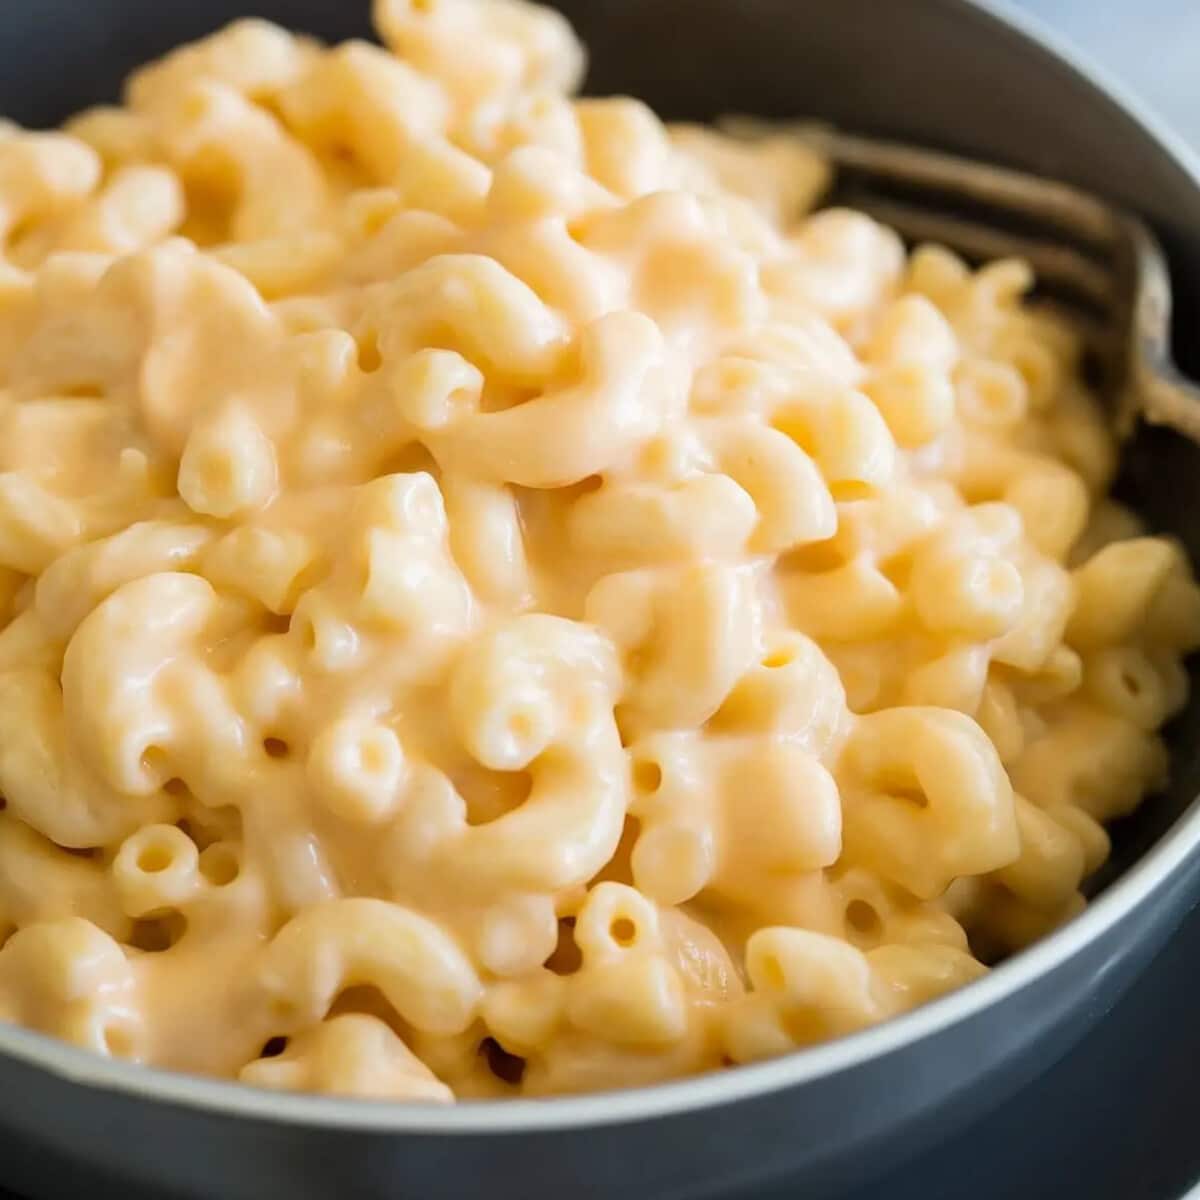 Mac and Cheese Rezept